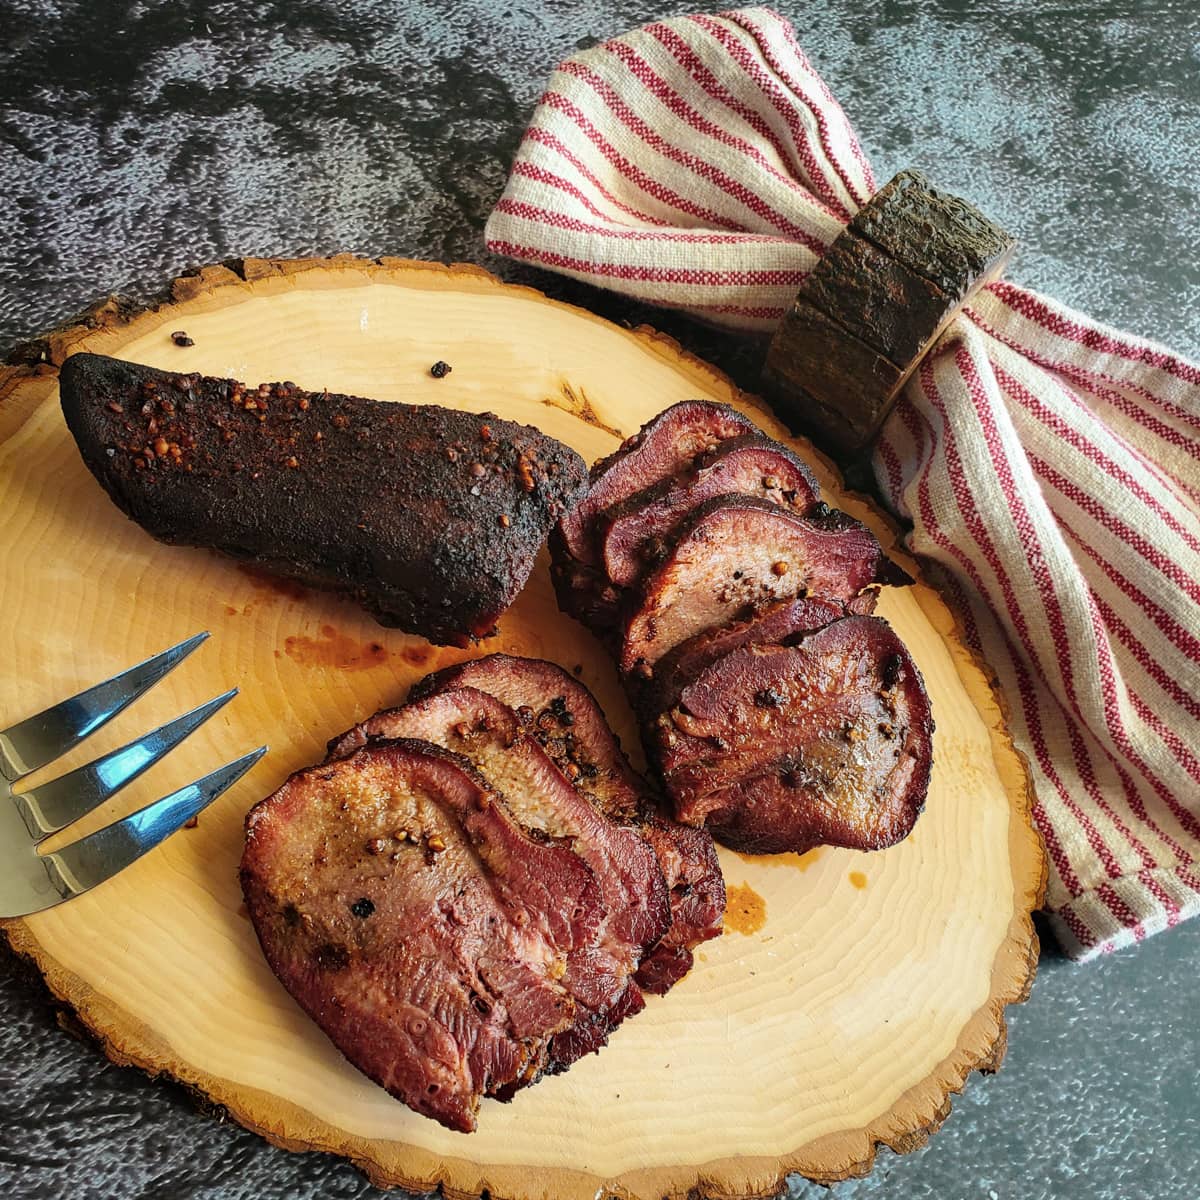 Smoked beef tongue pastrami cut into slices on a wood platter.